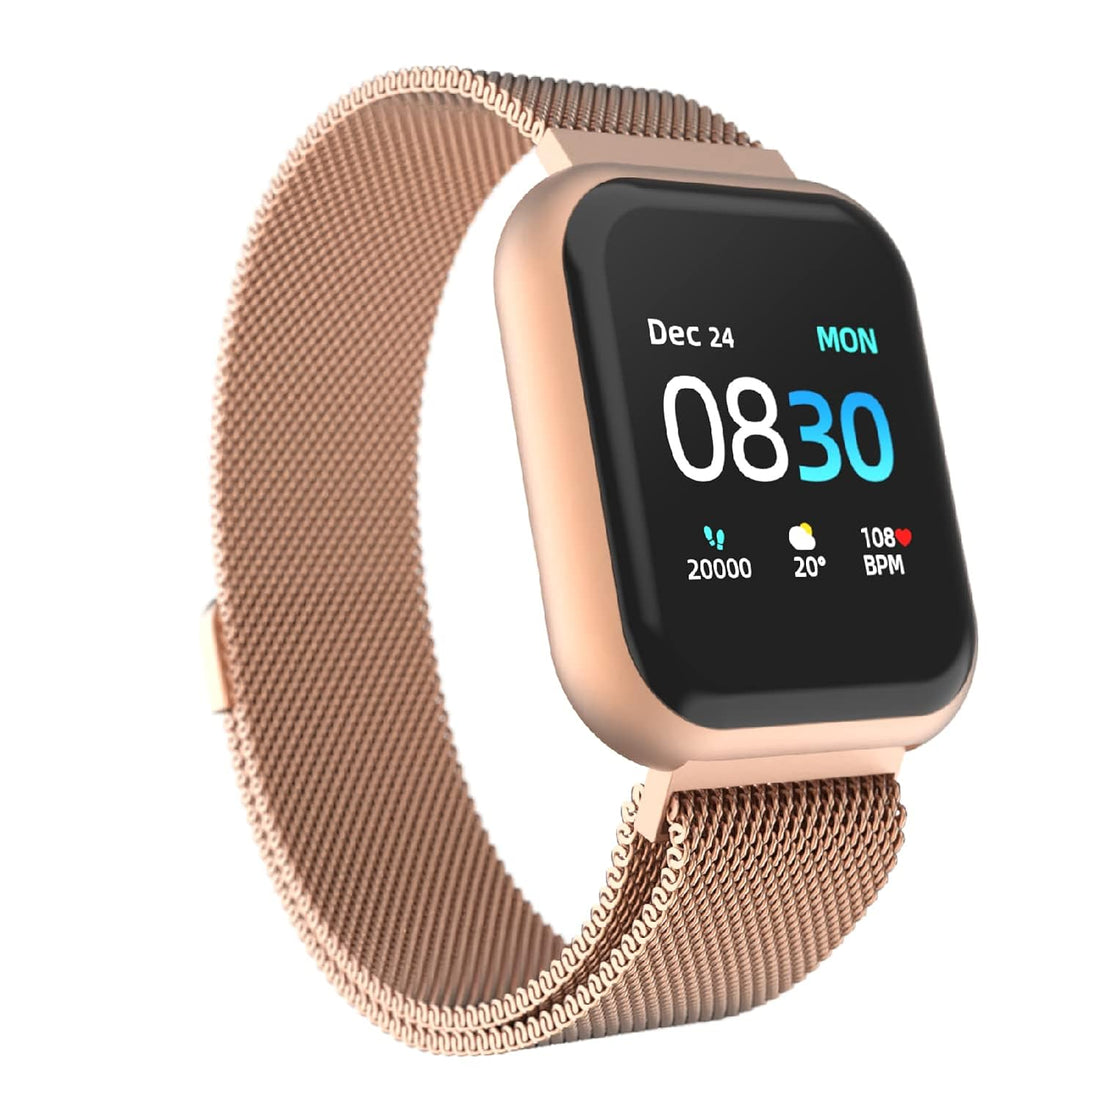 iTouch Air 3 Smartwatch for Fitness, iPhone and Android Compatible, Pedometer, Walking and Running Tracker for Women and Men (Rose Gold Mesh)